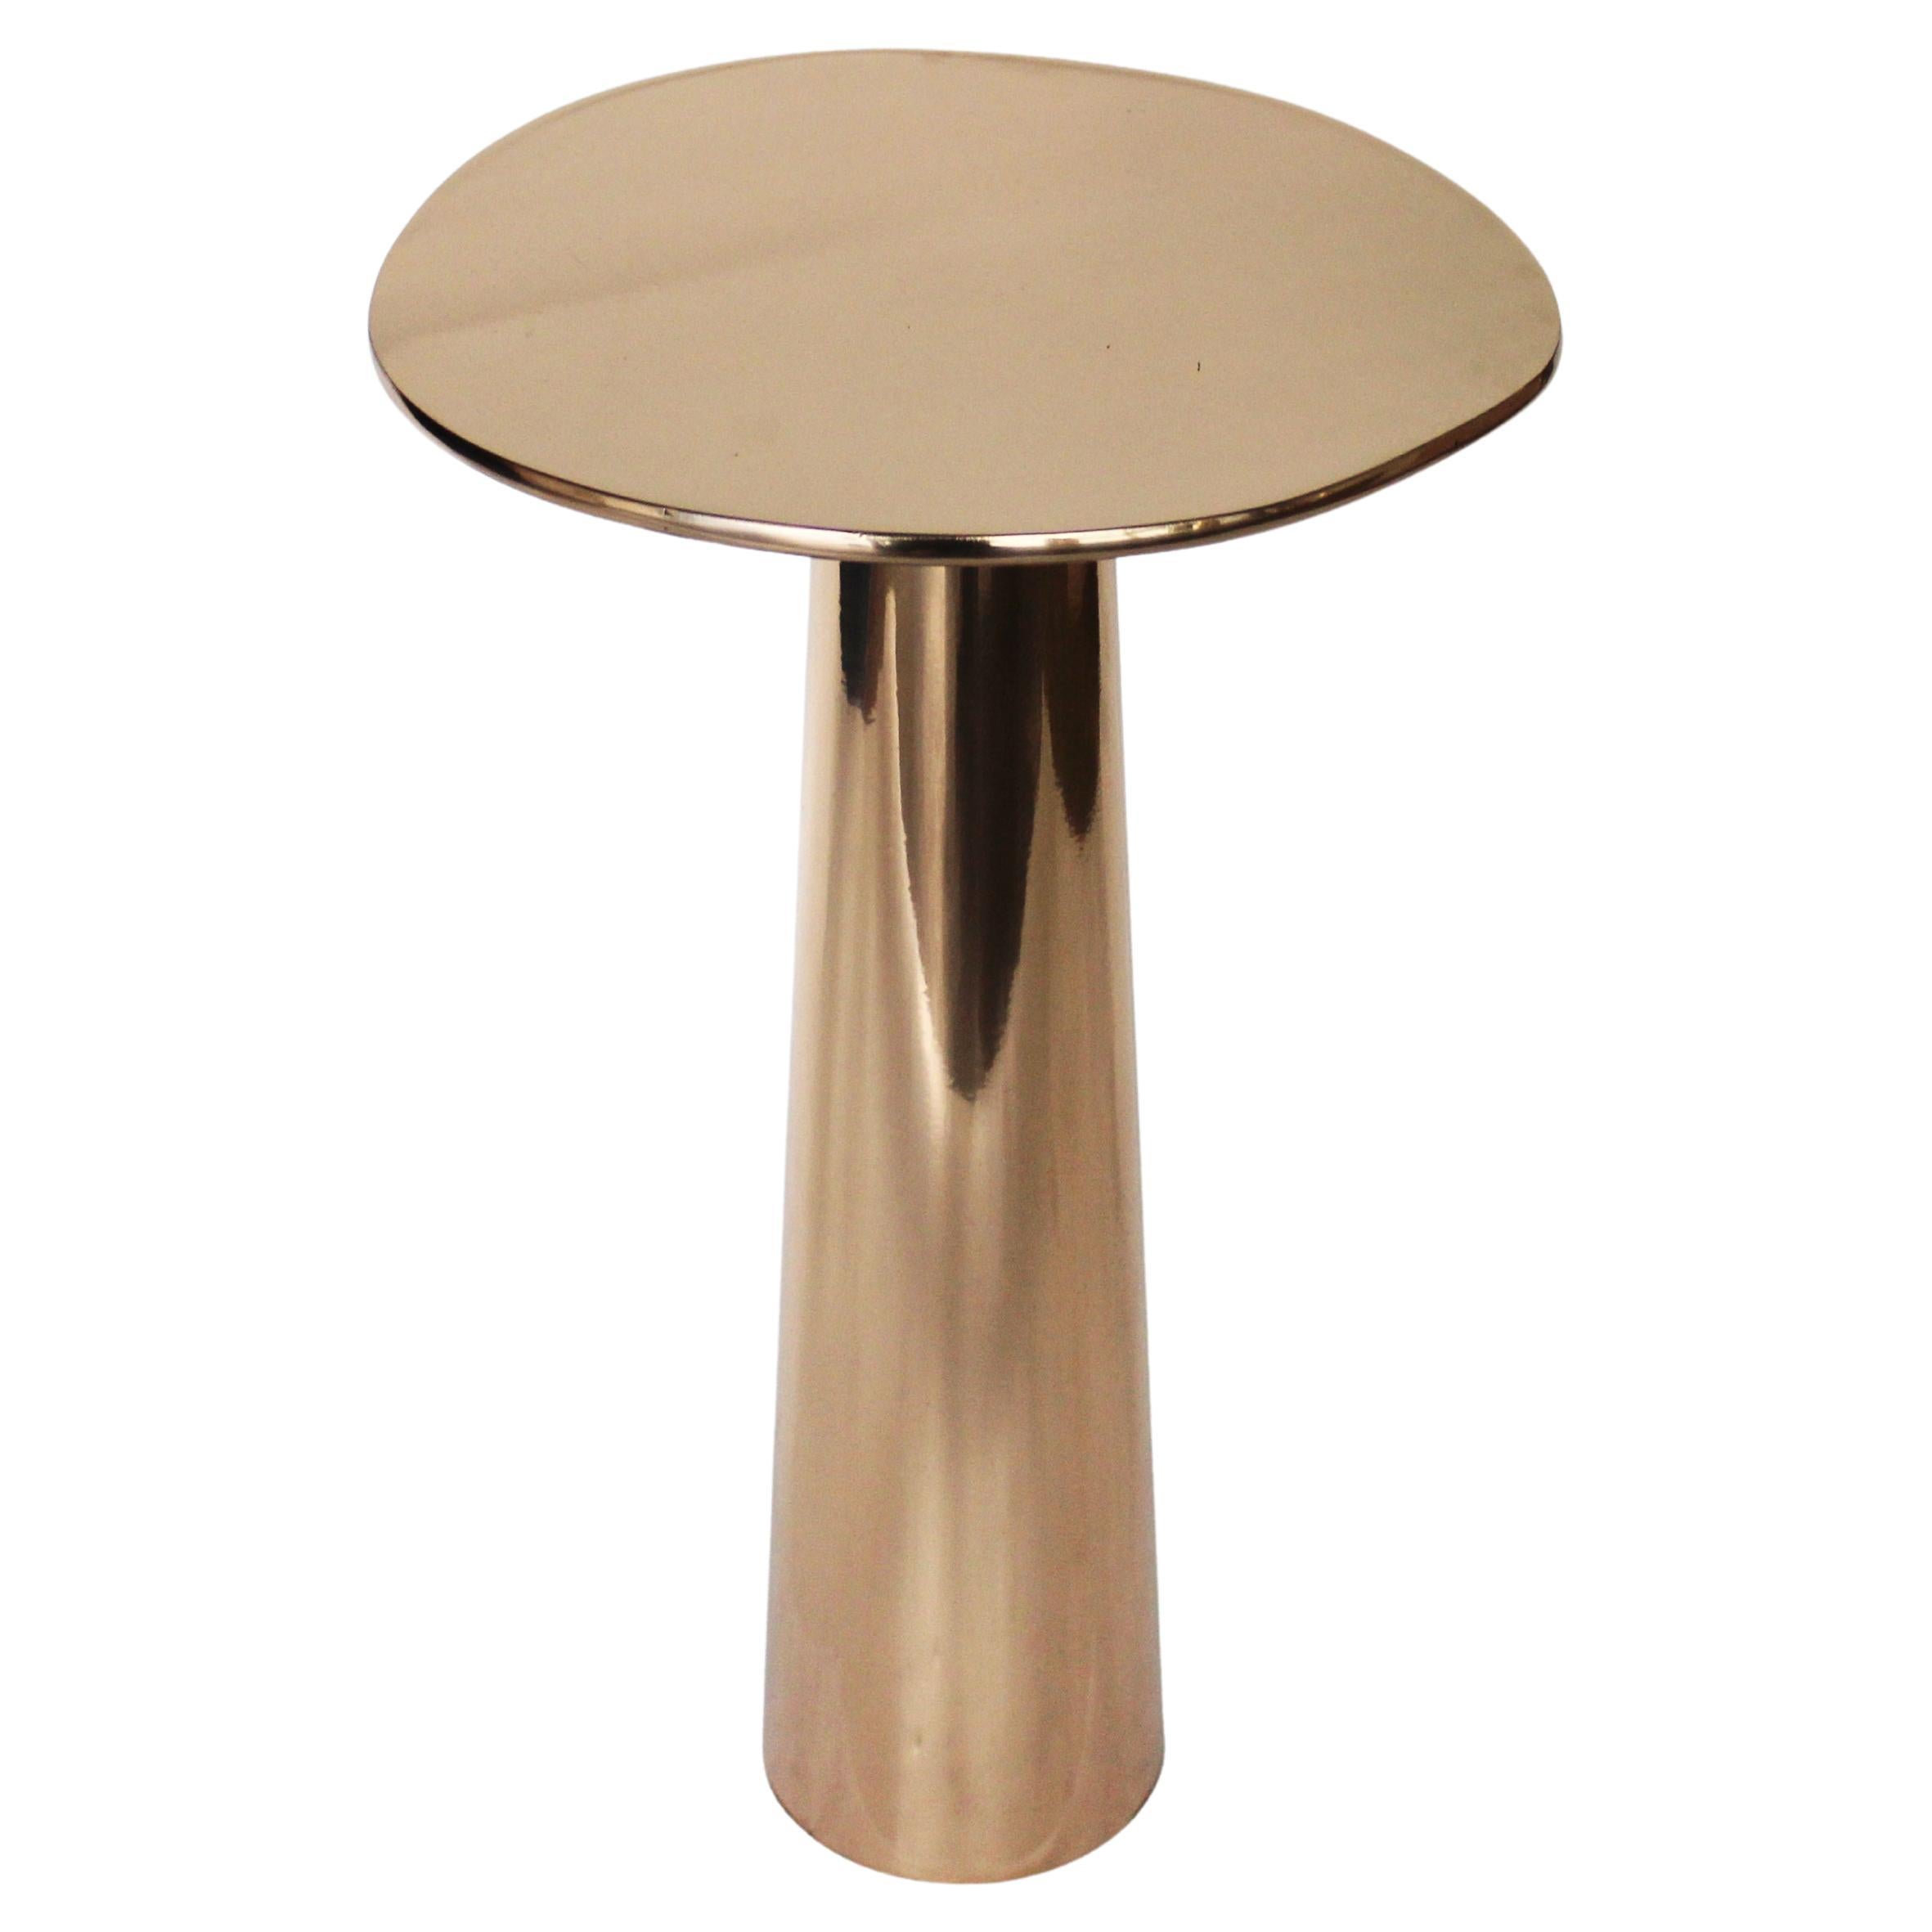 The Cone Table is inspired by the interconnections between the elements and life forms. The conical shape of the base, the asymmetrical form of the top, and the rounded edges provide the table with a silky appearance.

Cone Table, made of bronze or